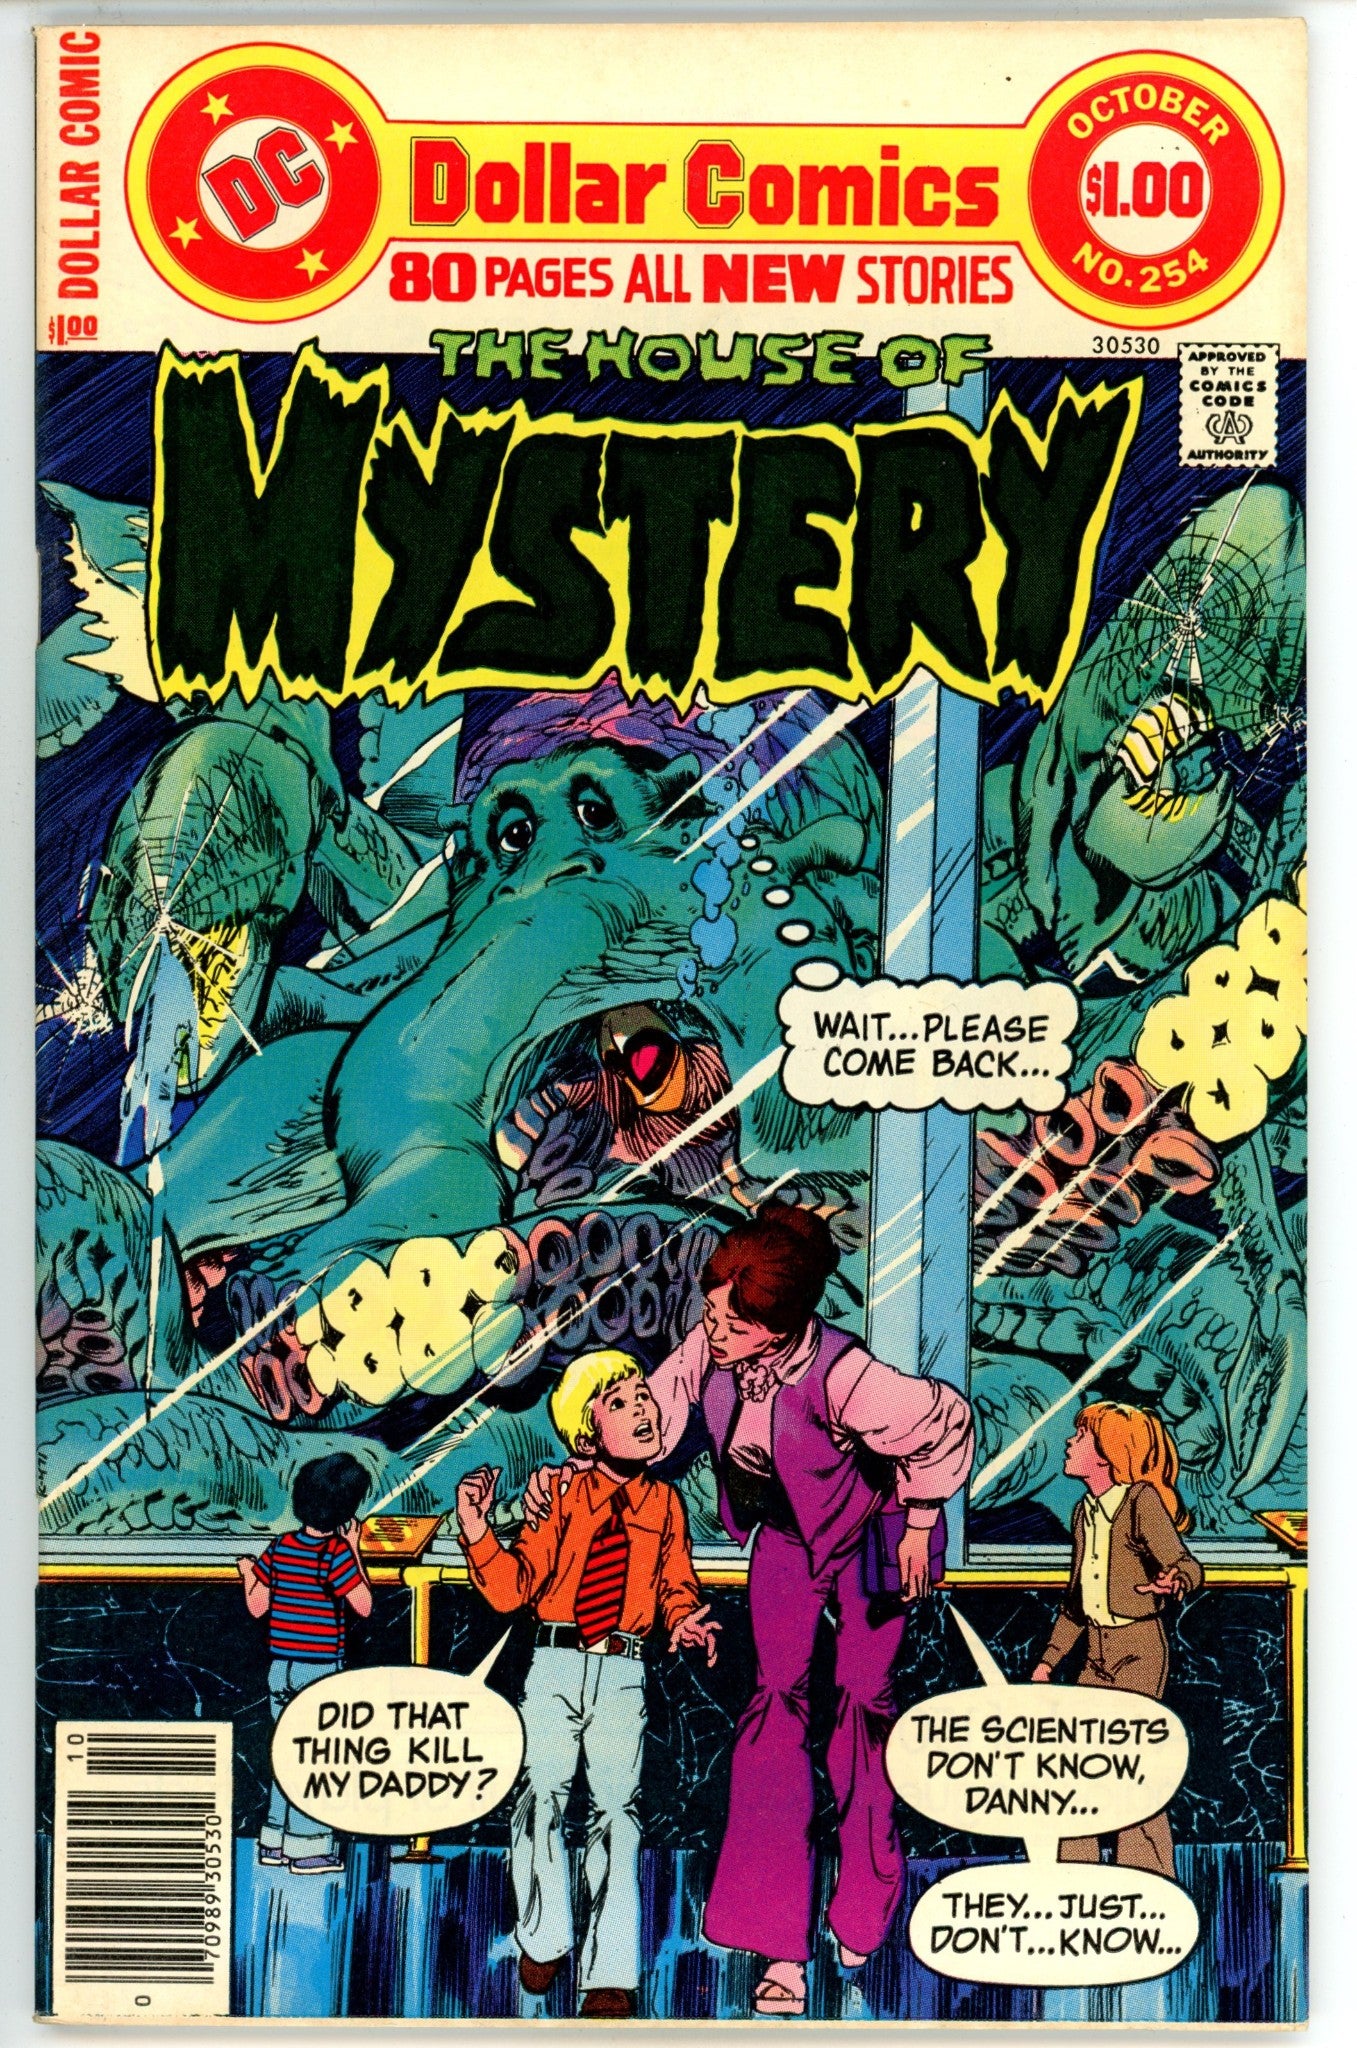 House of Mystery Vol 1 254 FN (6.0) (1977) 